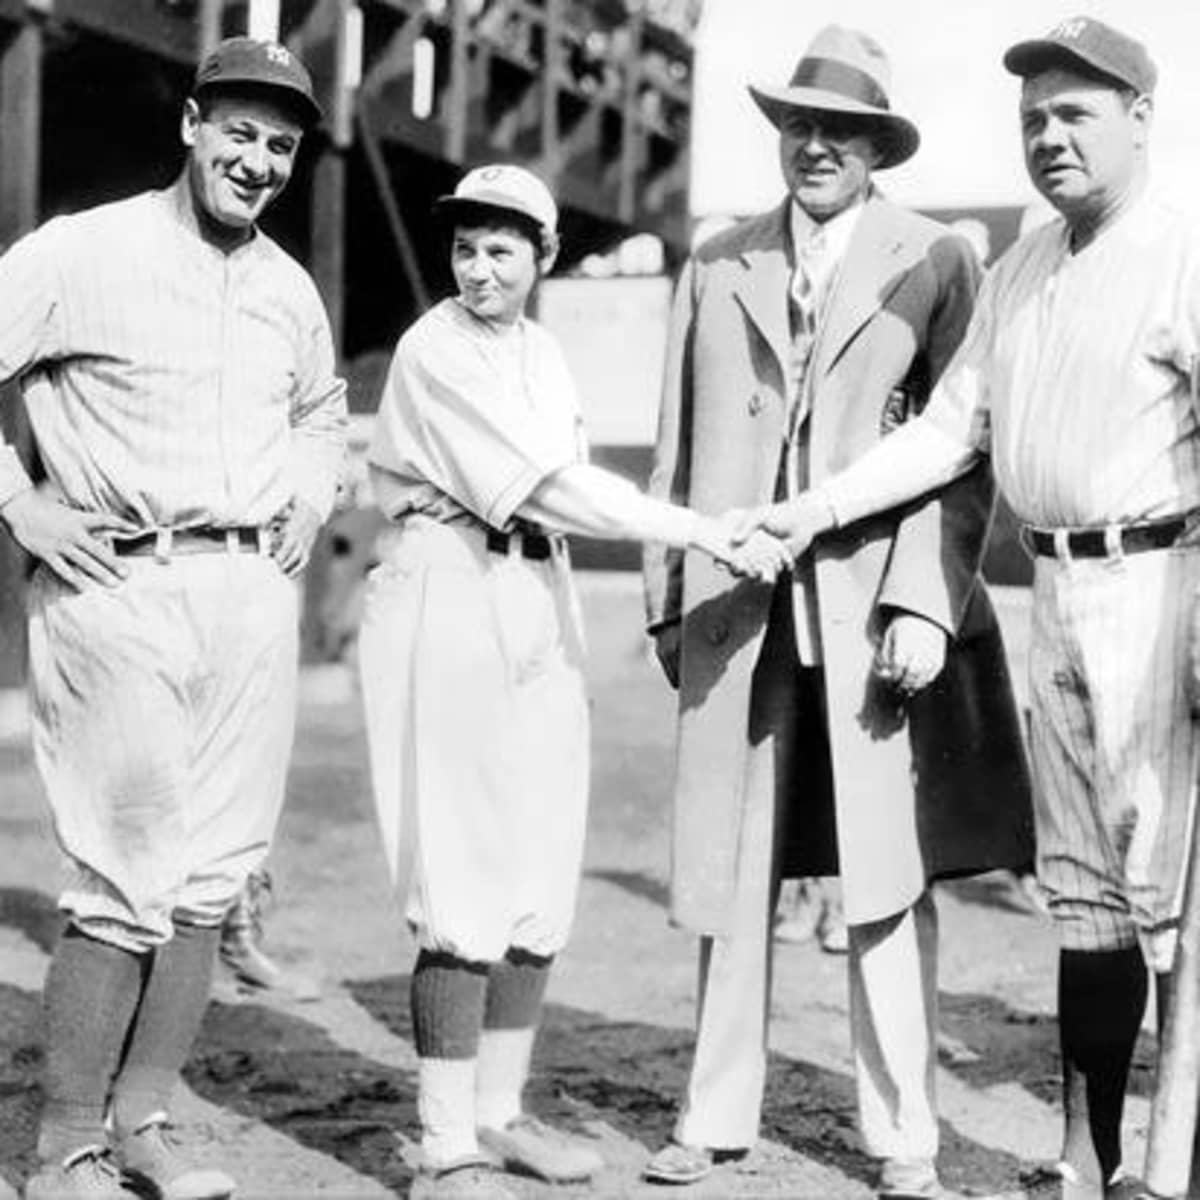 Babe Ruth showed how athletes should interact with presidents